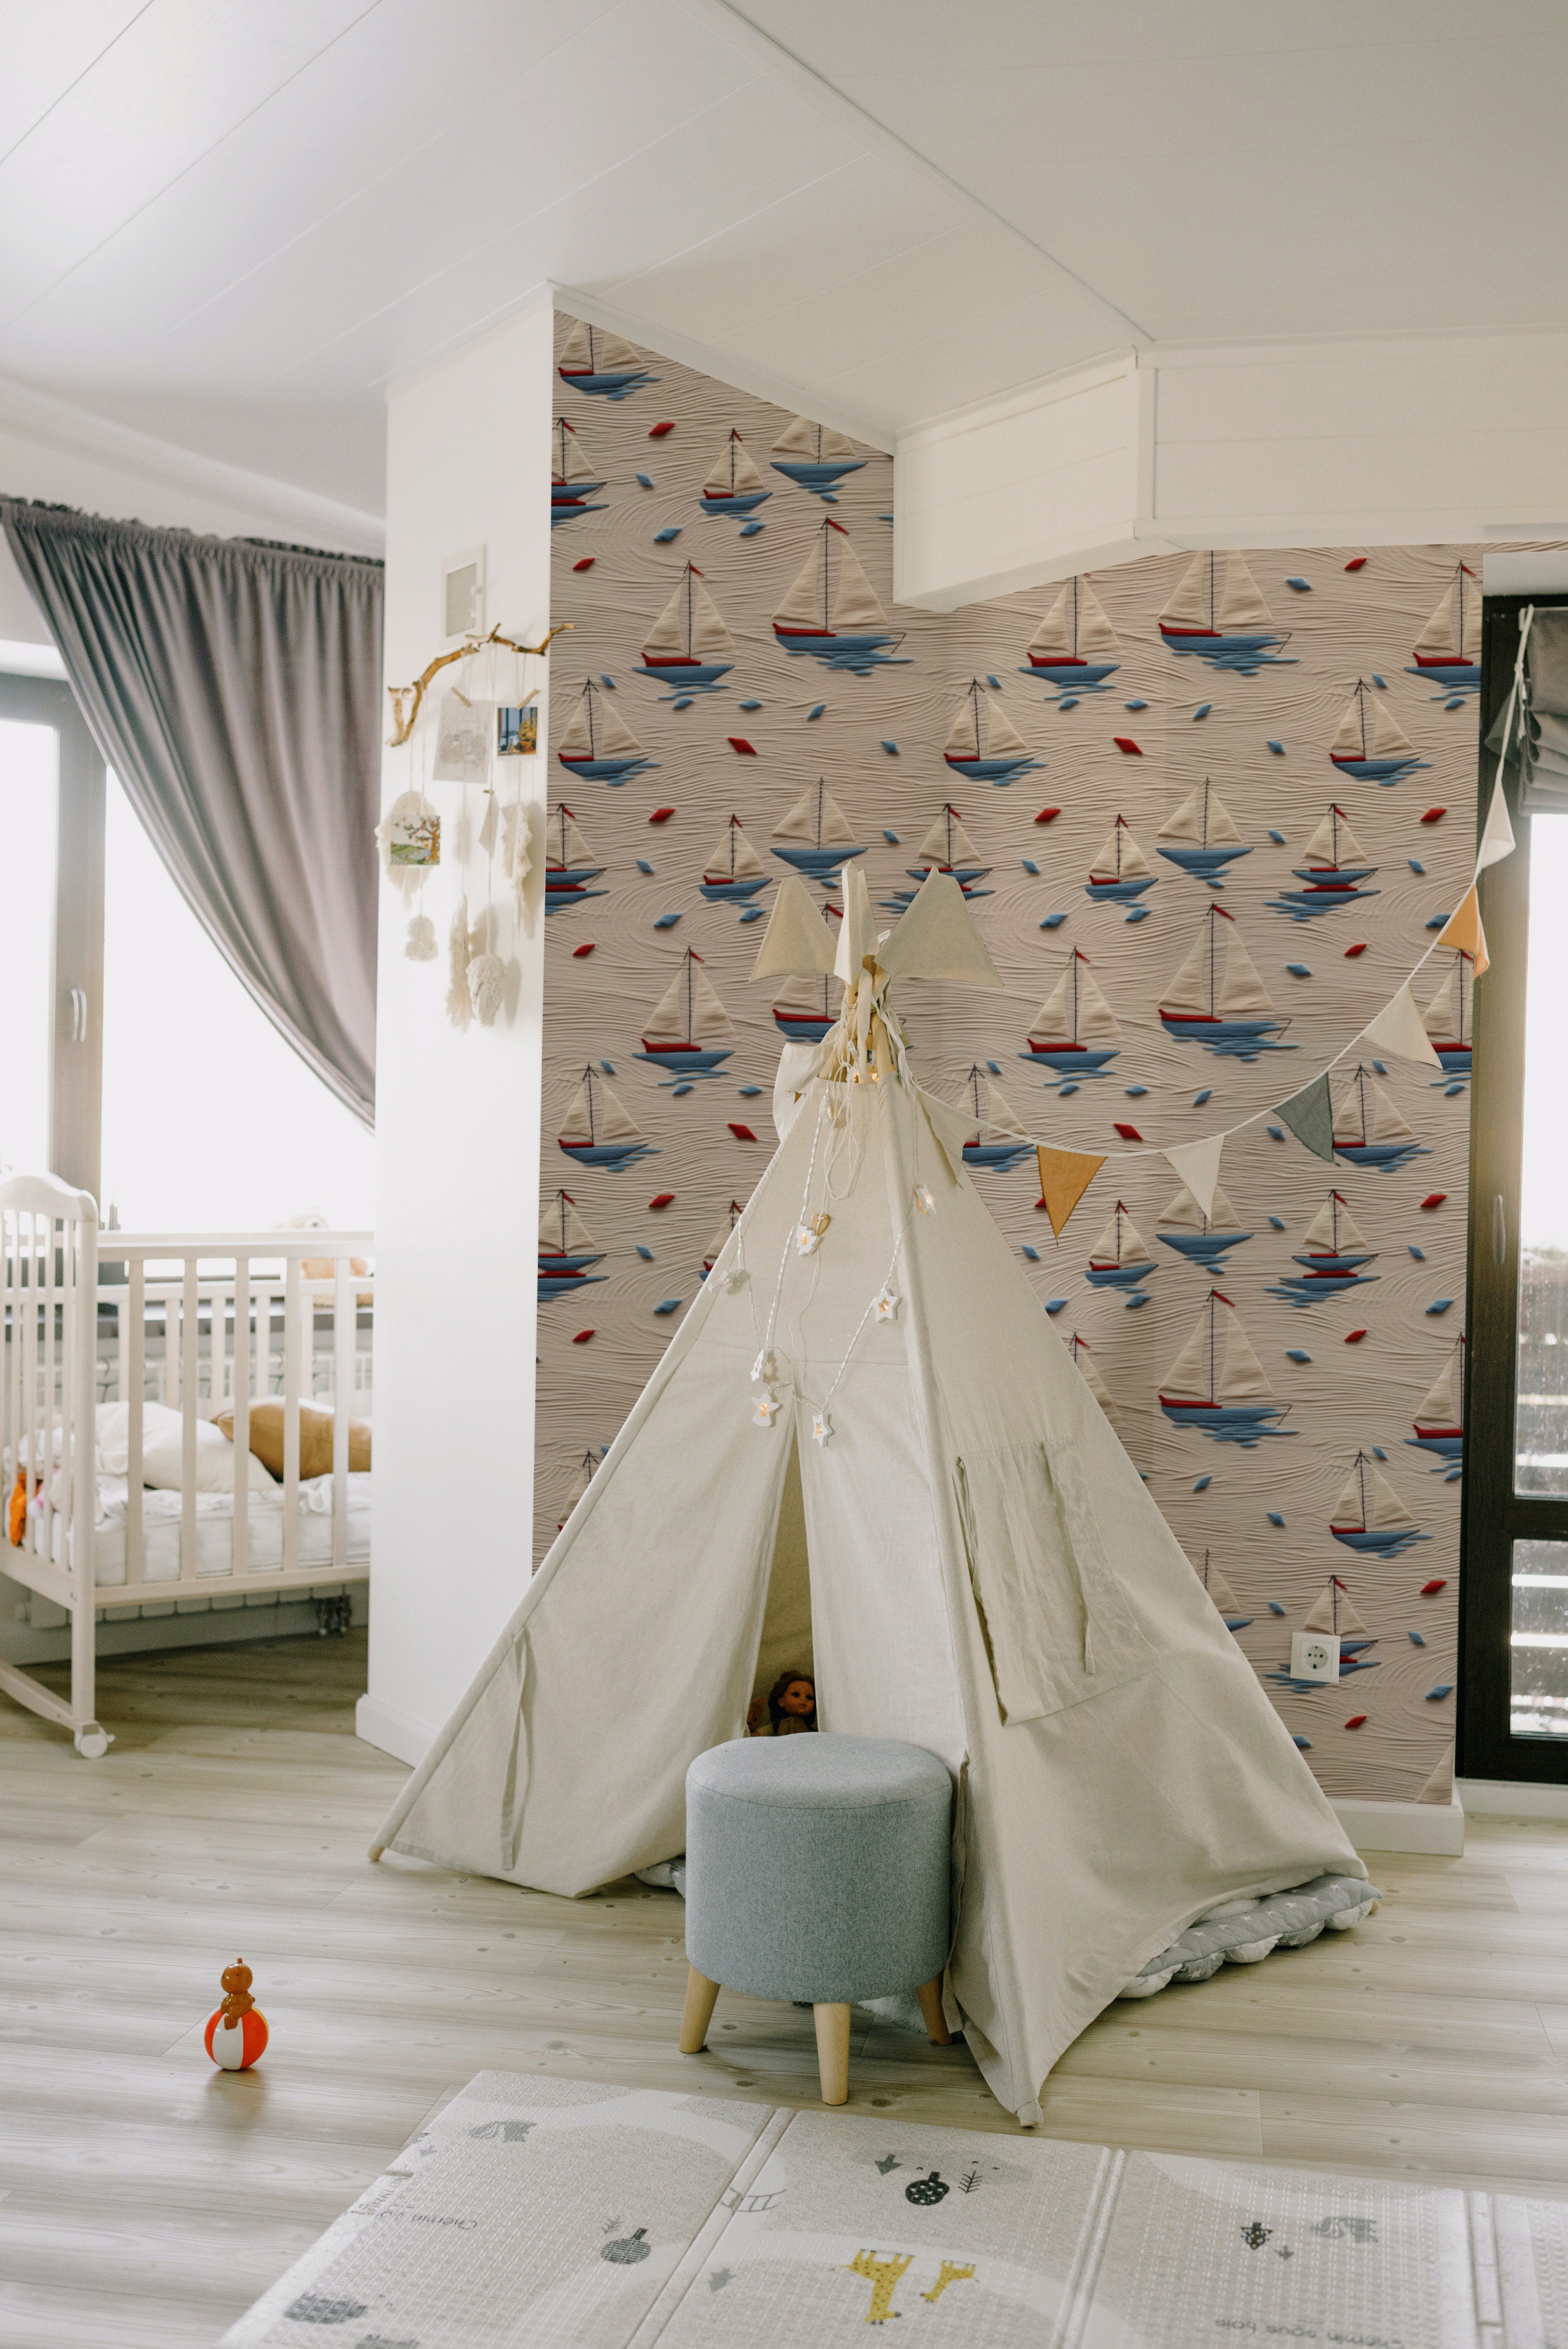 A child's play area decorated with Windward Sail Wallpaper, featuring a whimsical pattern of white sailboats with red and blue accents on a textured beige background. The setting includes a playful tent and soft, inviting colors, enhancing the nautical theme.